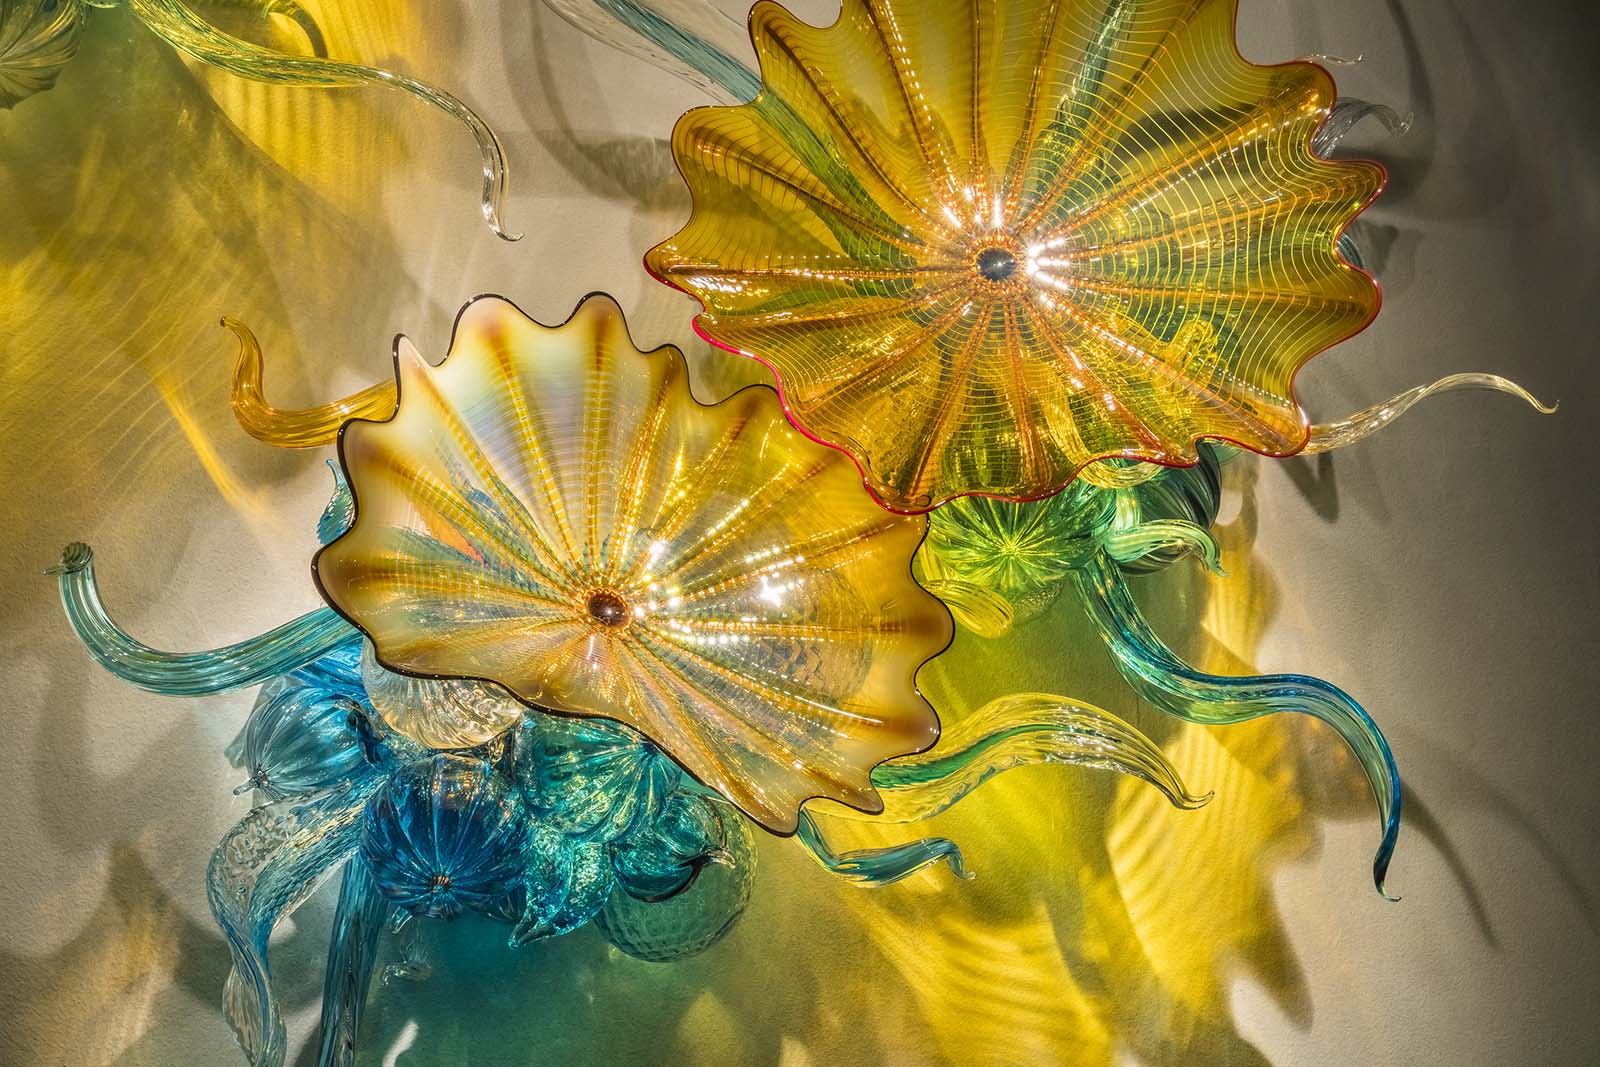 Dale Chihuly, Topaz and Aqua Persian Sconce Wall (detail), 2016